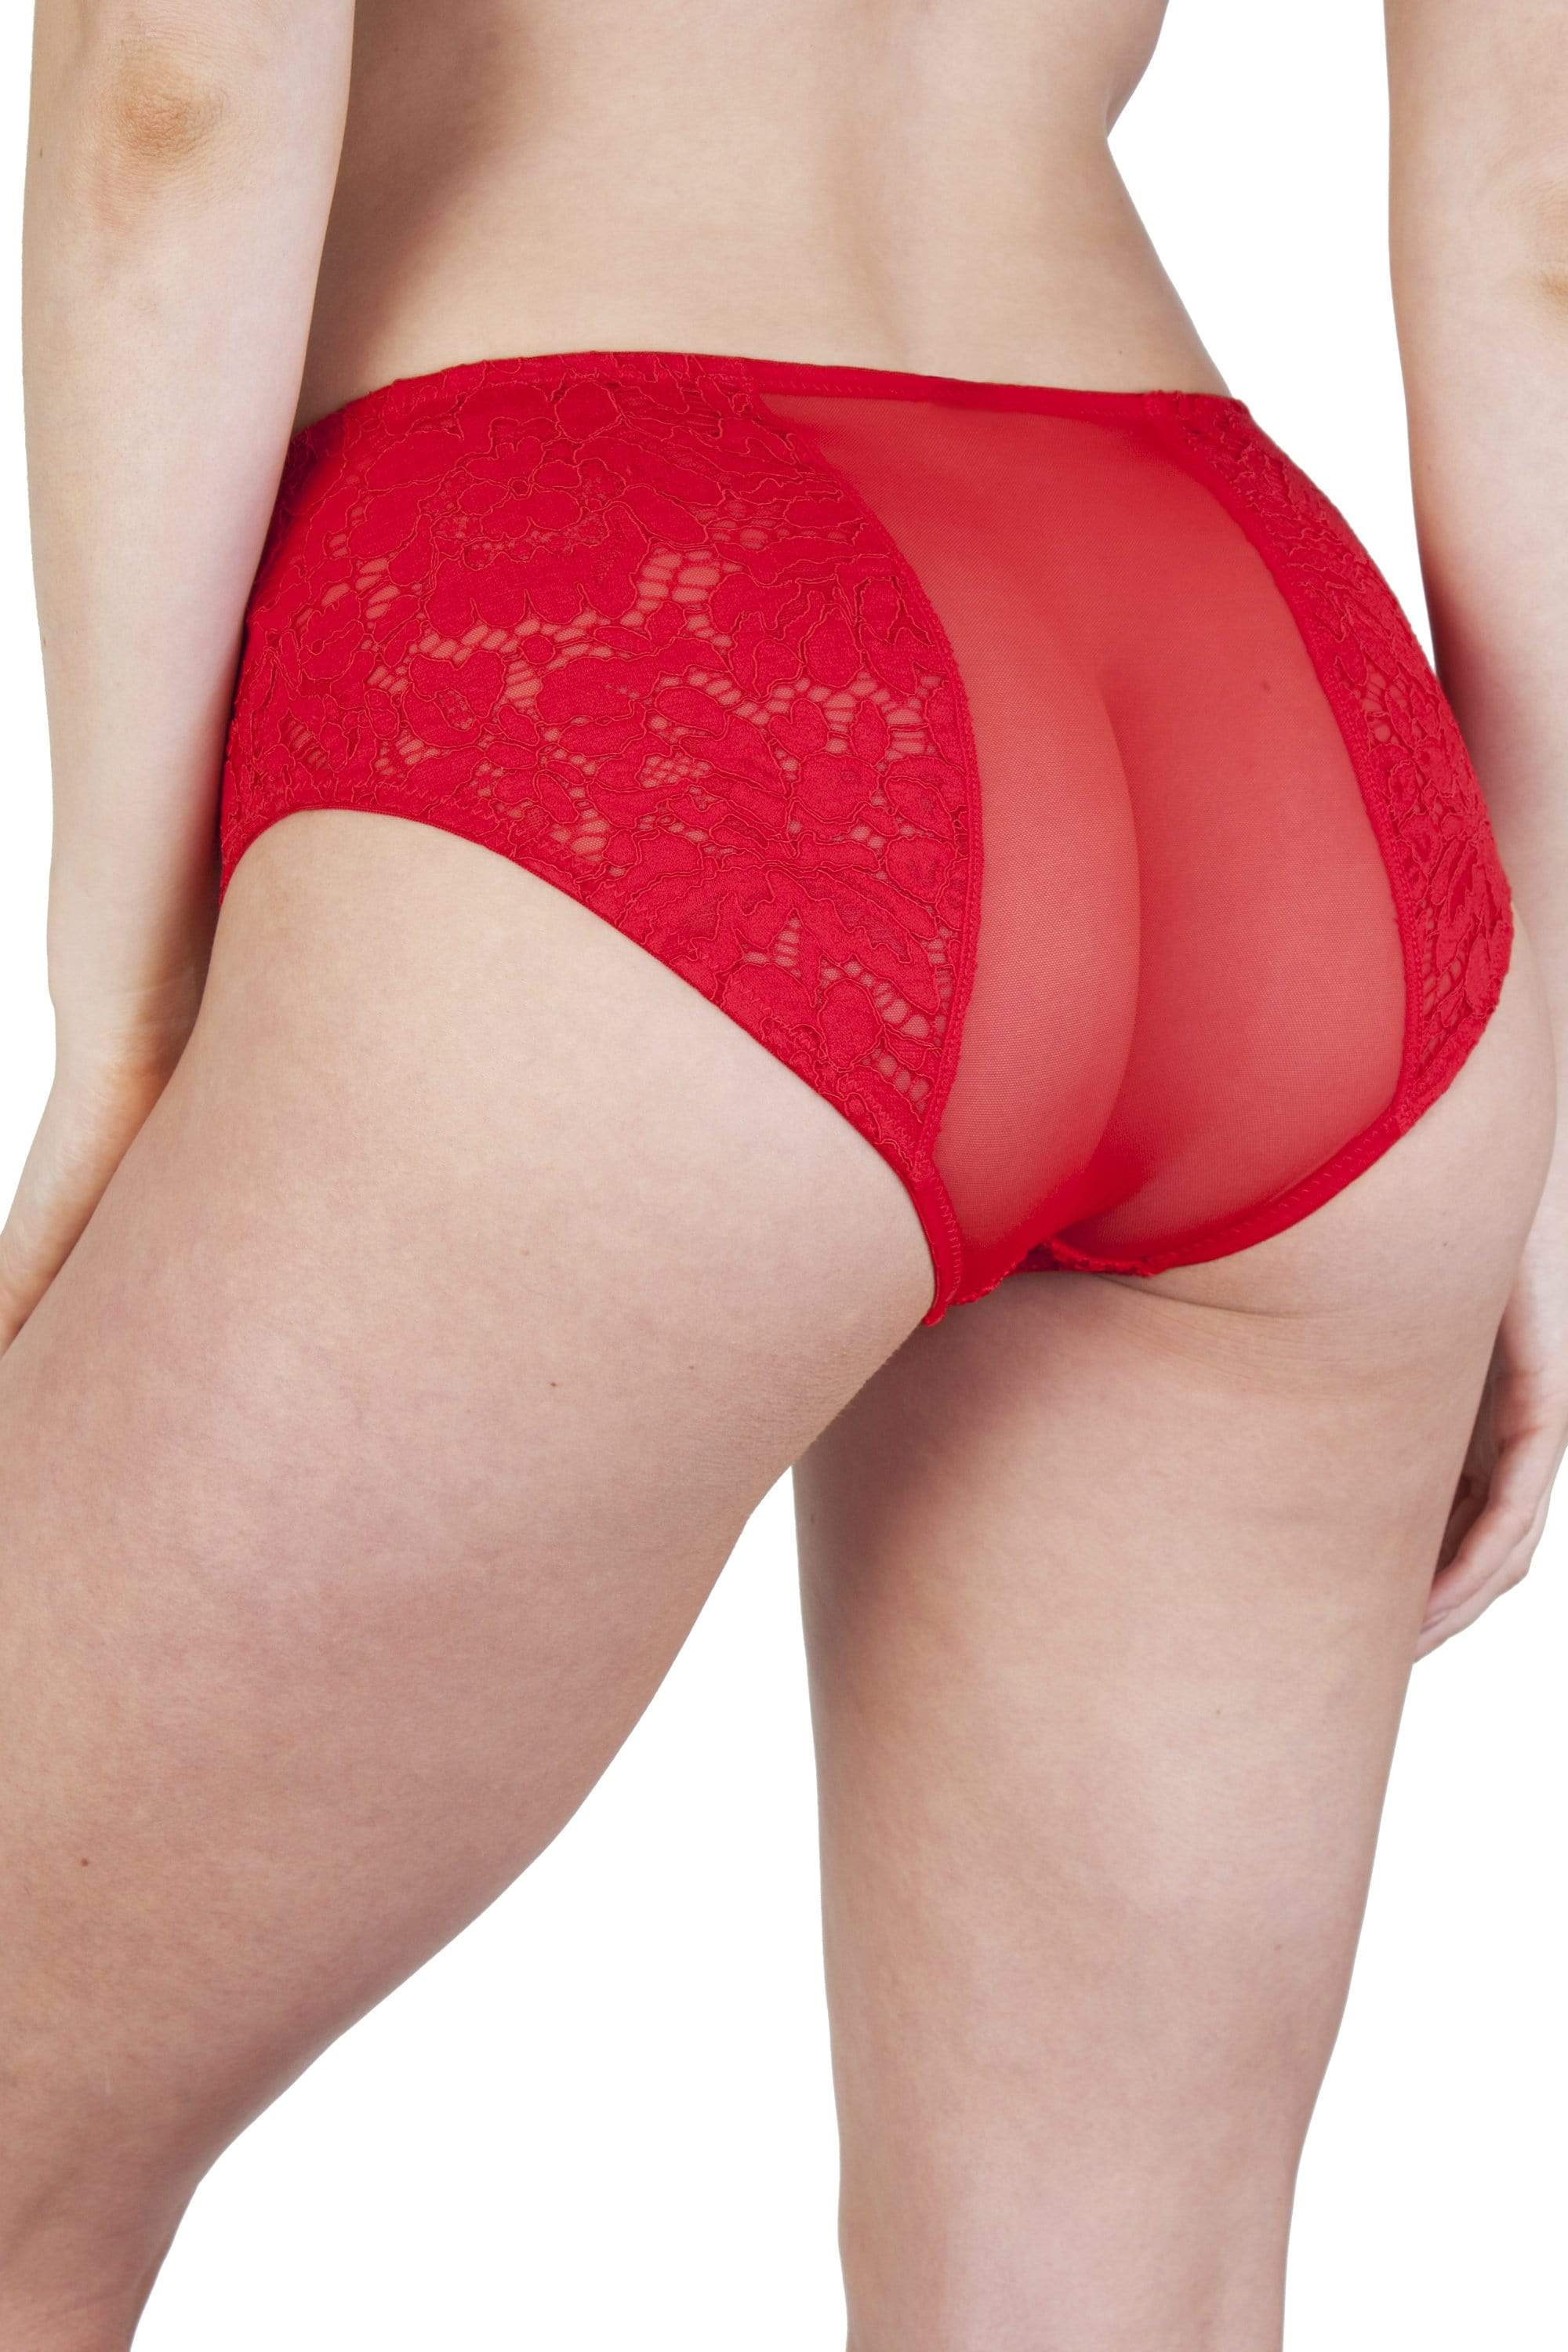 Toyen Red Mesh & Lace HW Corset Brief